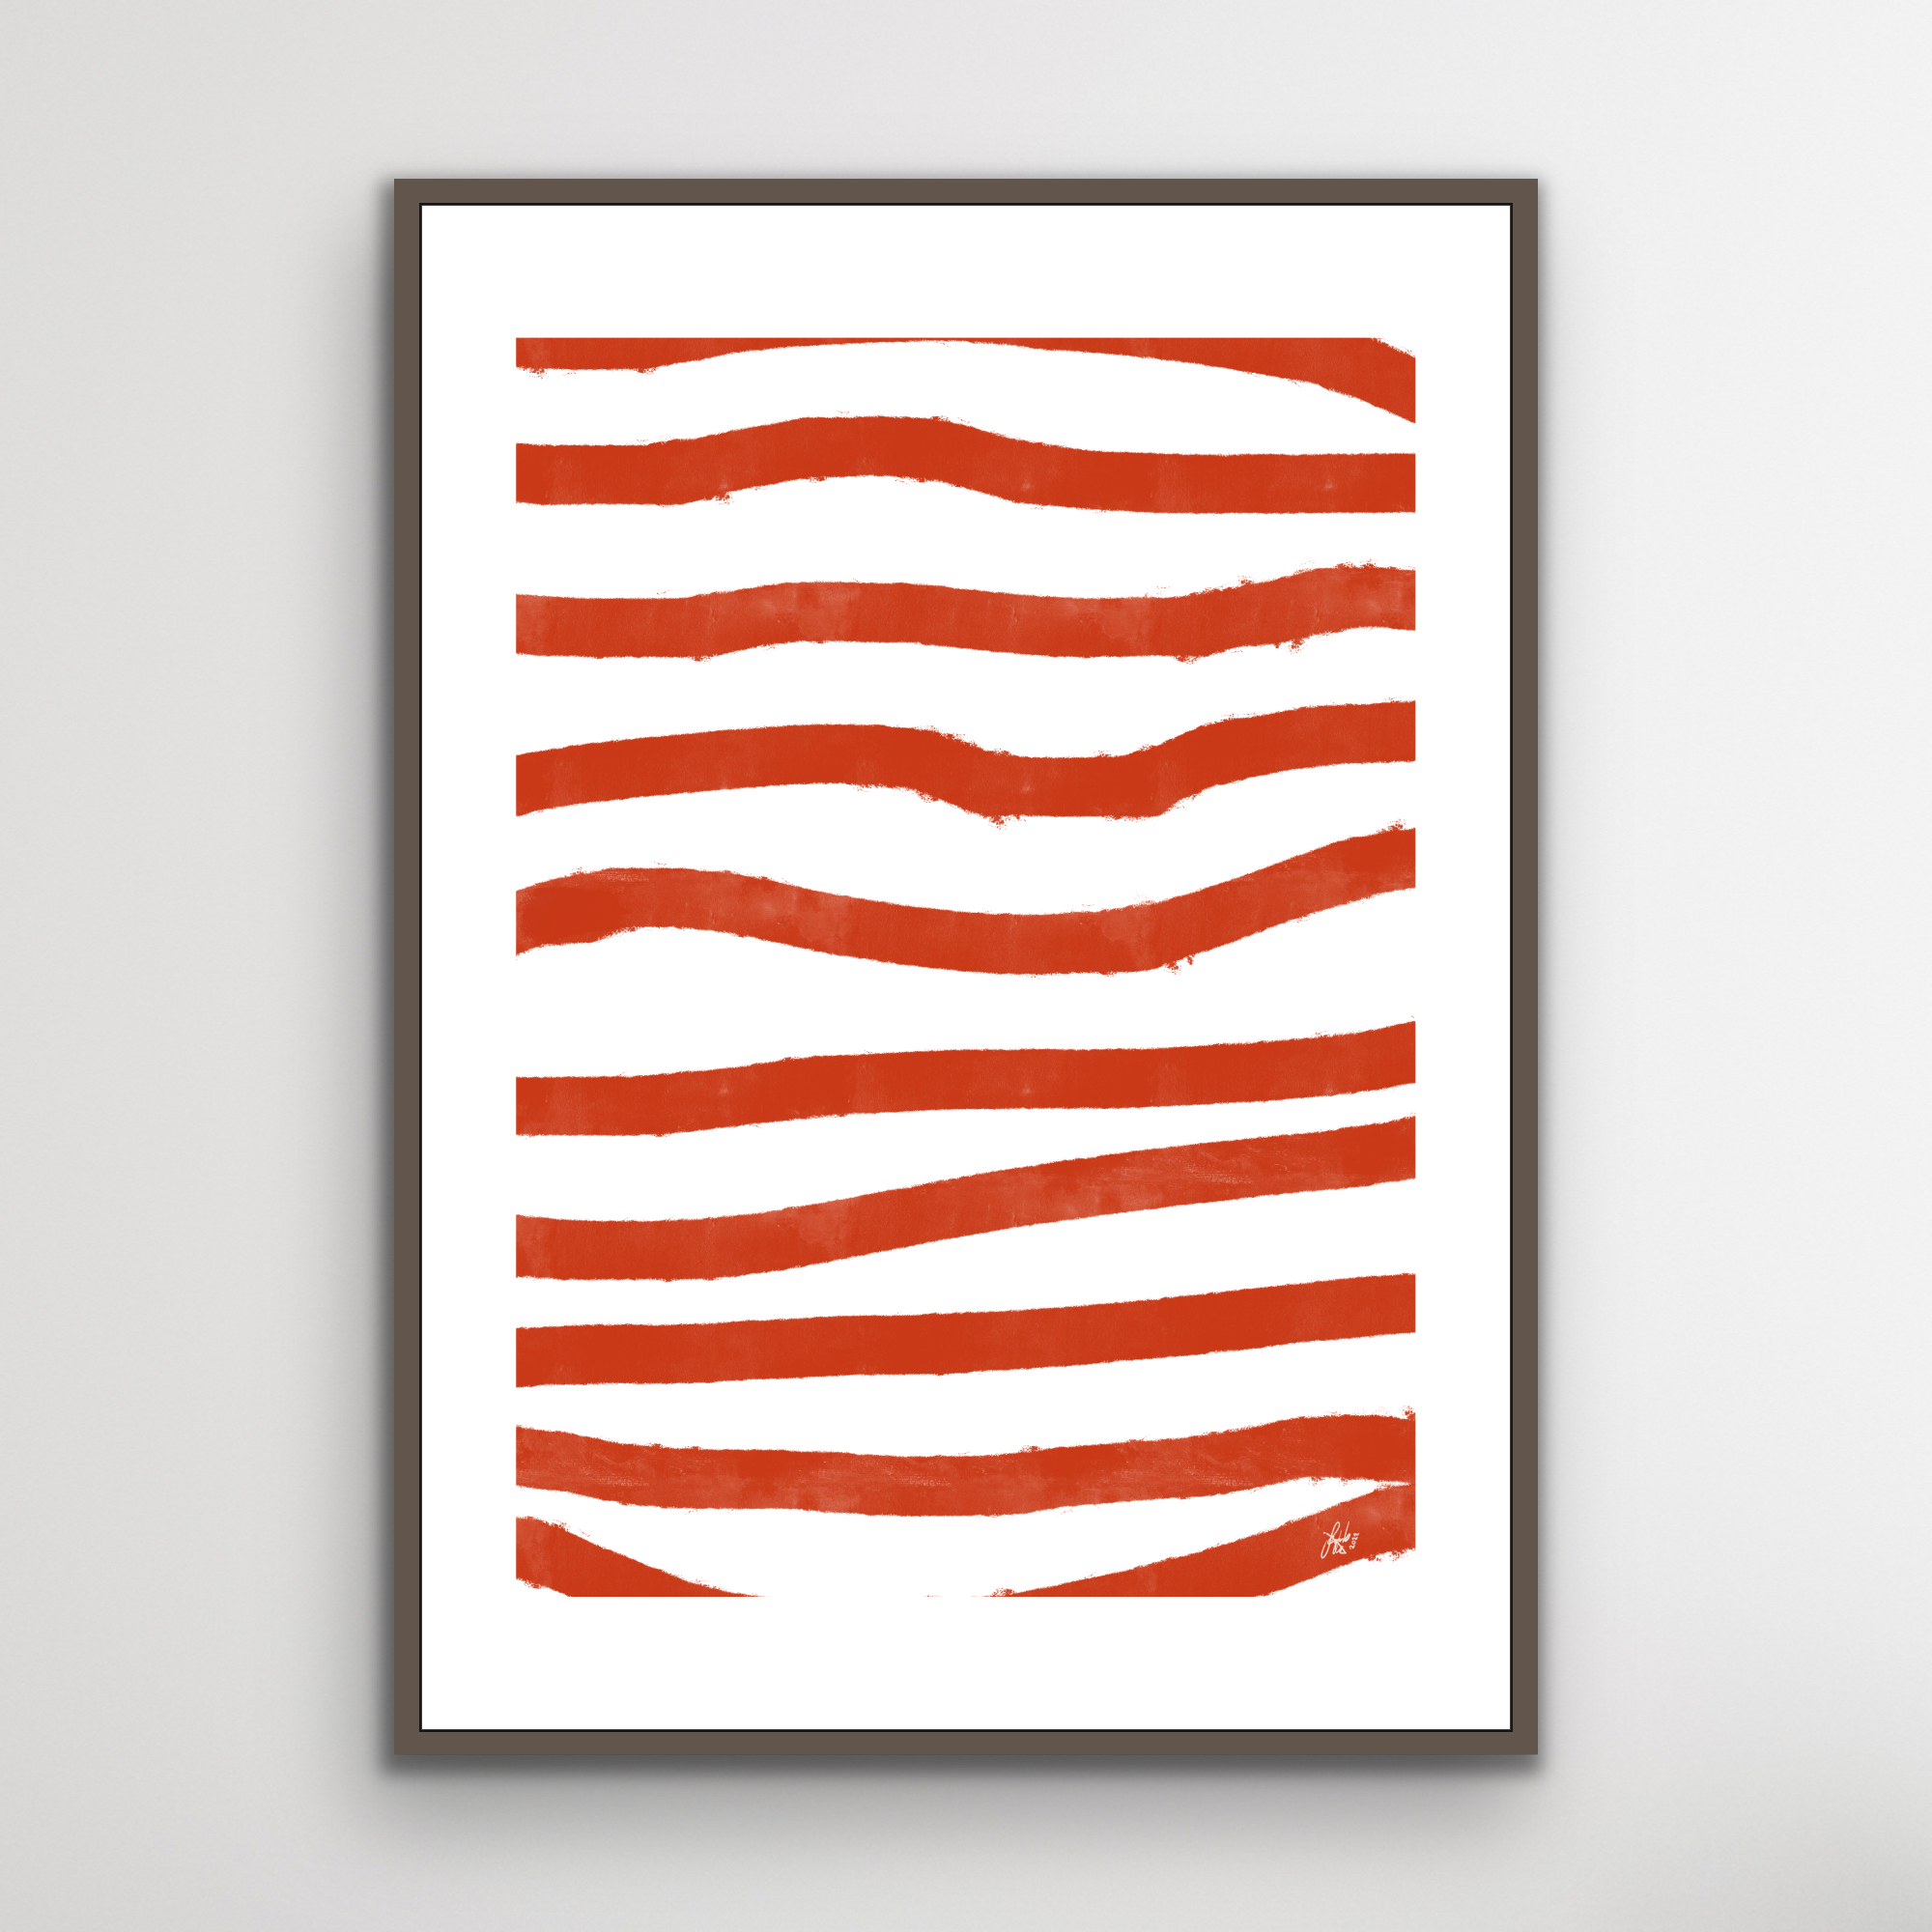 Poster: "Red Stripes"